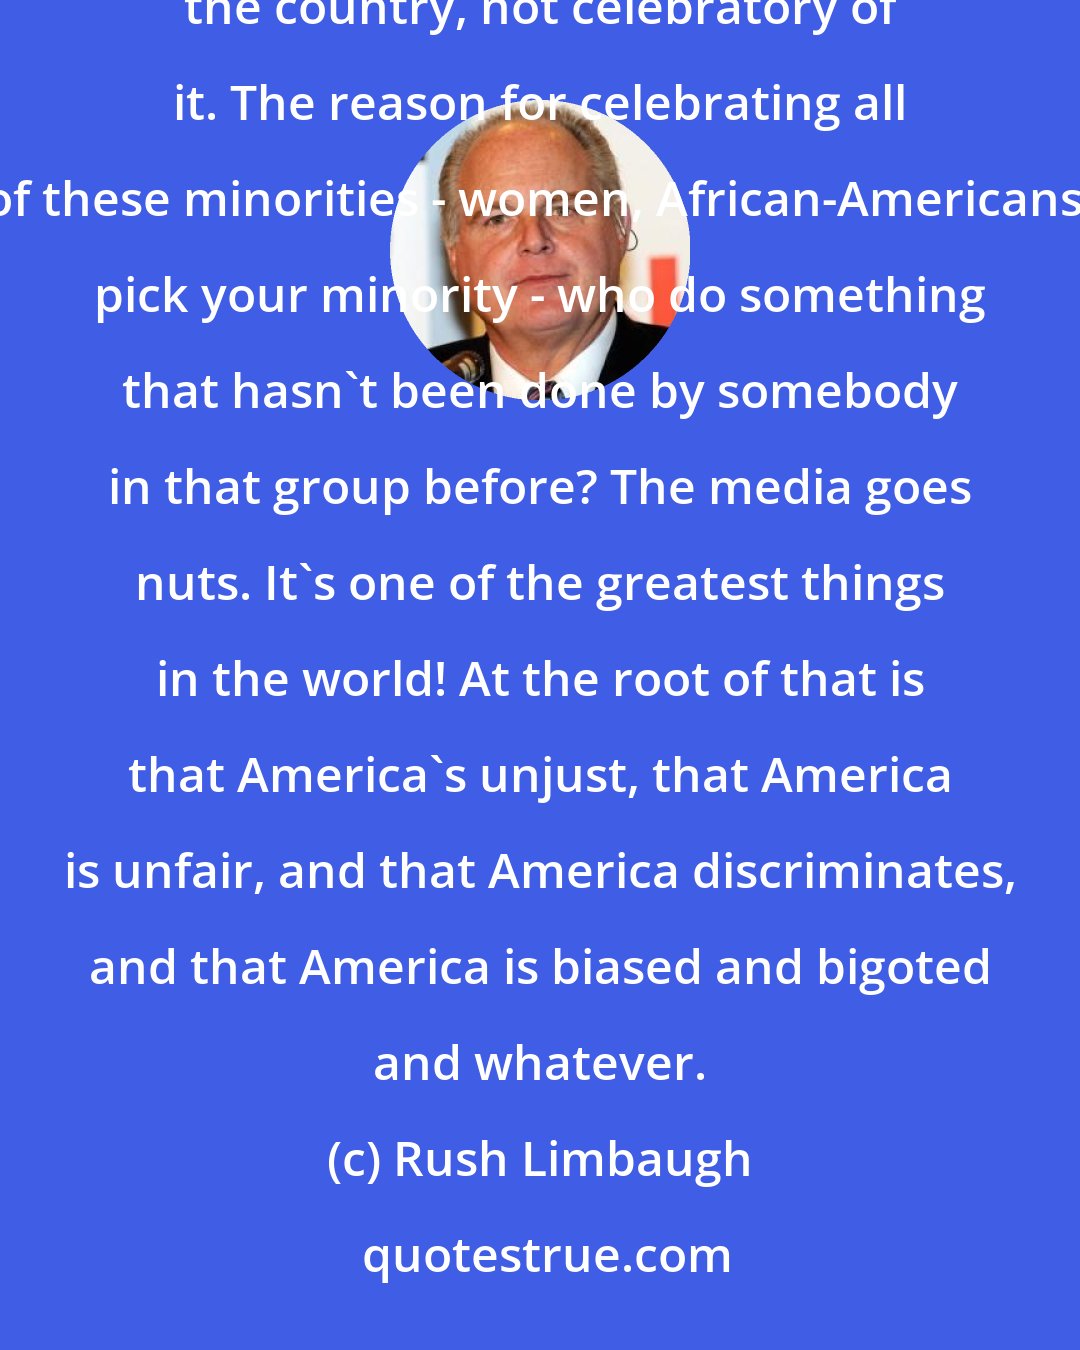 Rush Limbaugh: At least in my perception, seeing accomplishments of minorities is a way to actually be critical of the country, not celebratory of it. The reason for celebrating all of these minorities - women, African-Americans, pick your minority - who do something that hasn't been done by somebody in that group before? The media goes nuts. It's one of the greatest things in the world! At the root of that is that America's unjust, that America is unfair, and that America discriminates, and that America is biased and bigoted and whatever.